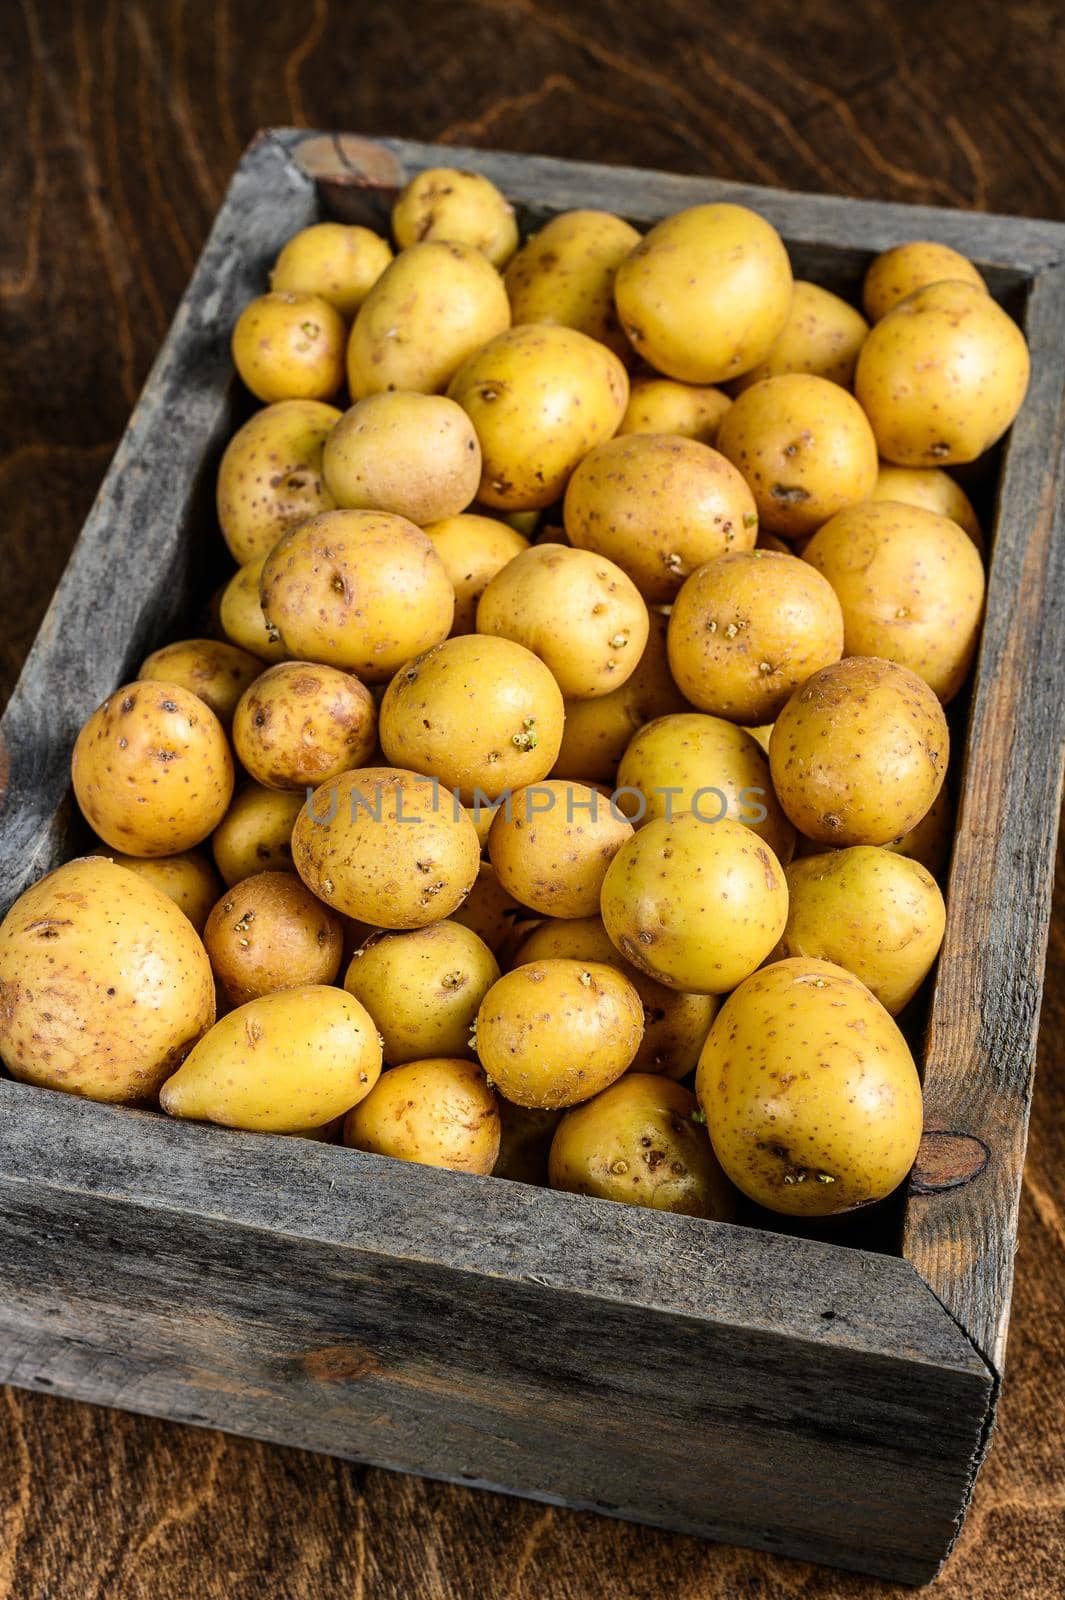 Young baby Potatoes in a wooden box. Wooden background. Top view by Composter